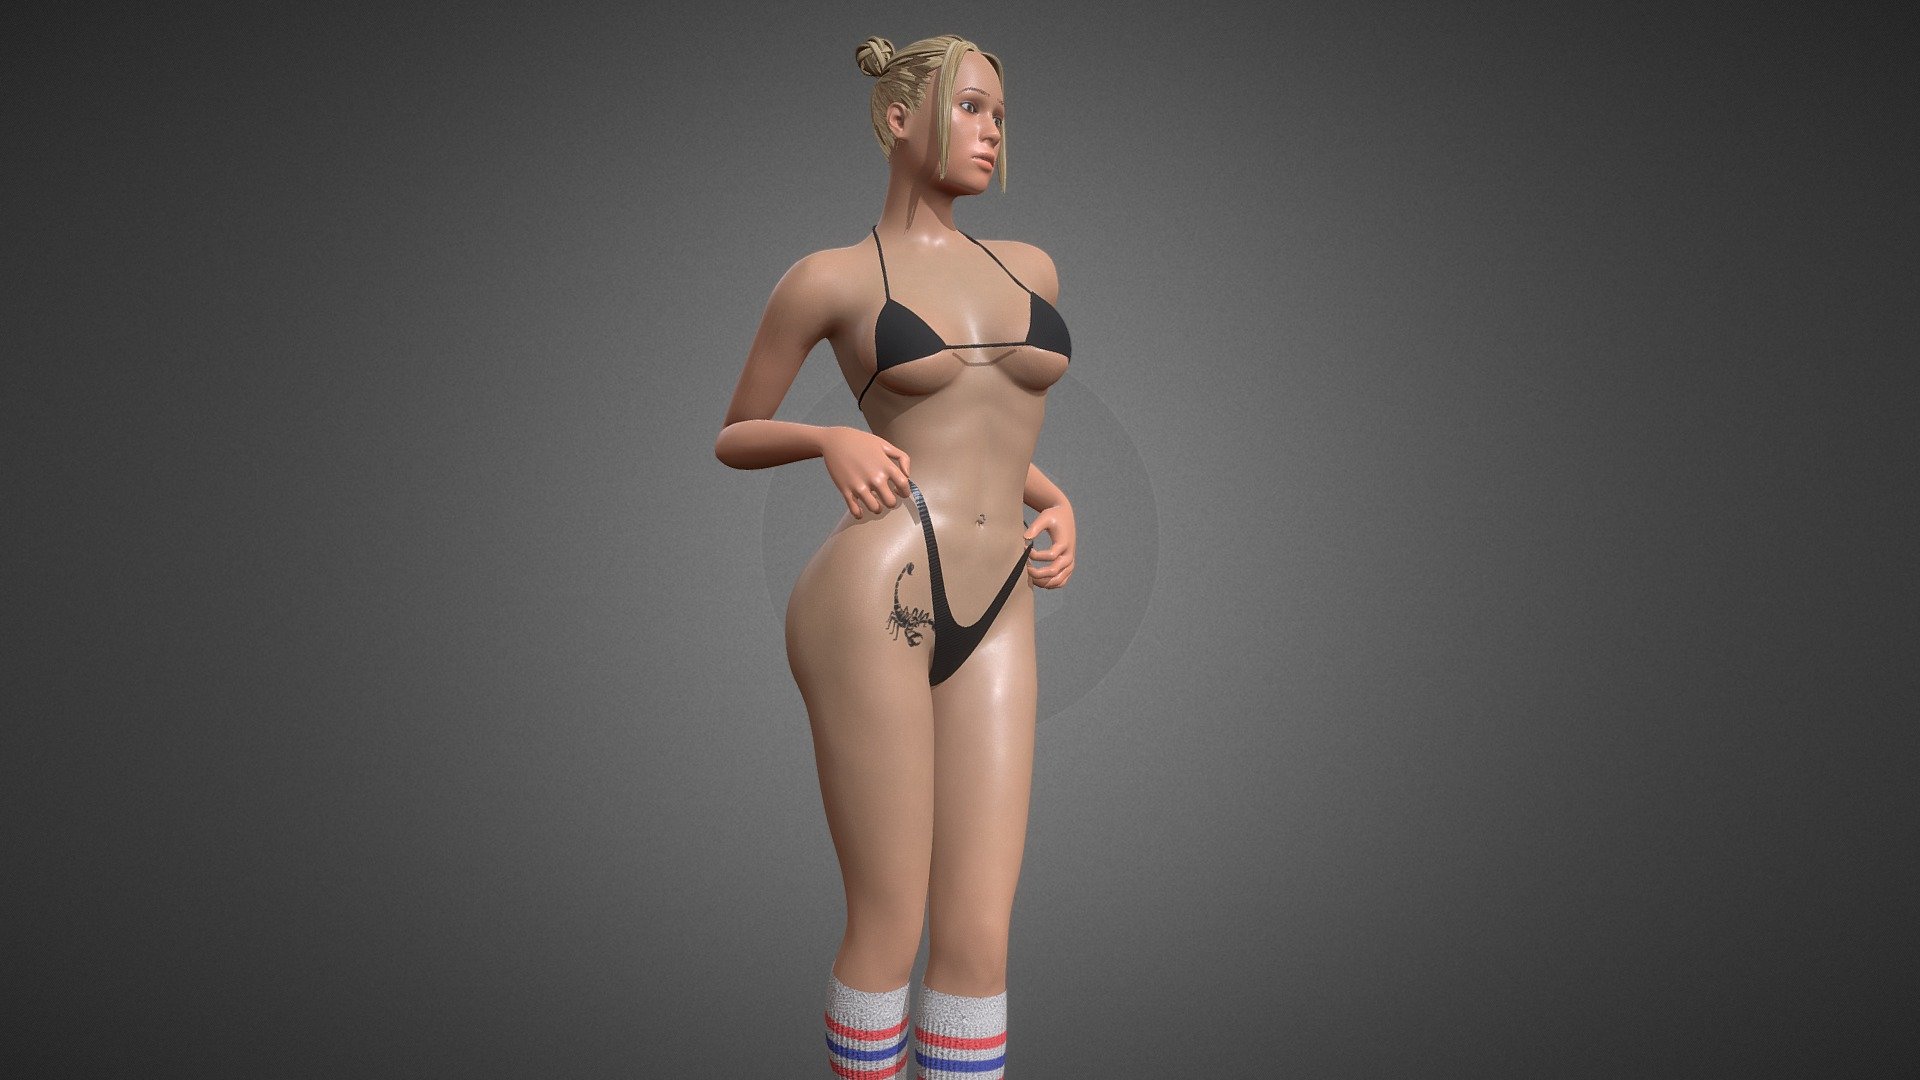 Fictional Instagram thot. Any resemblance with any real Instagram model is pure coincidence as it is not my intention to depict any real life person. Includes renders and .blend file 3d model